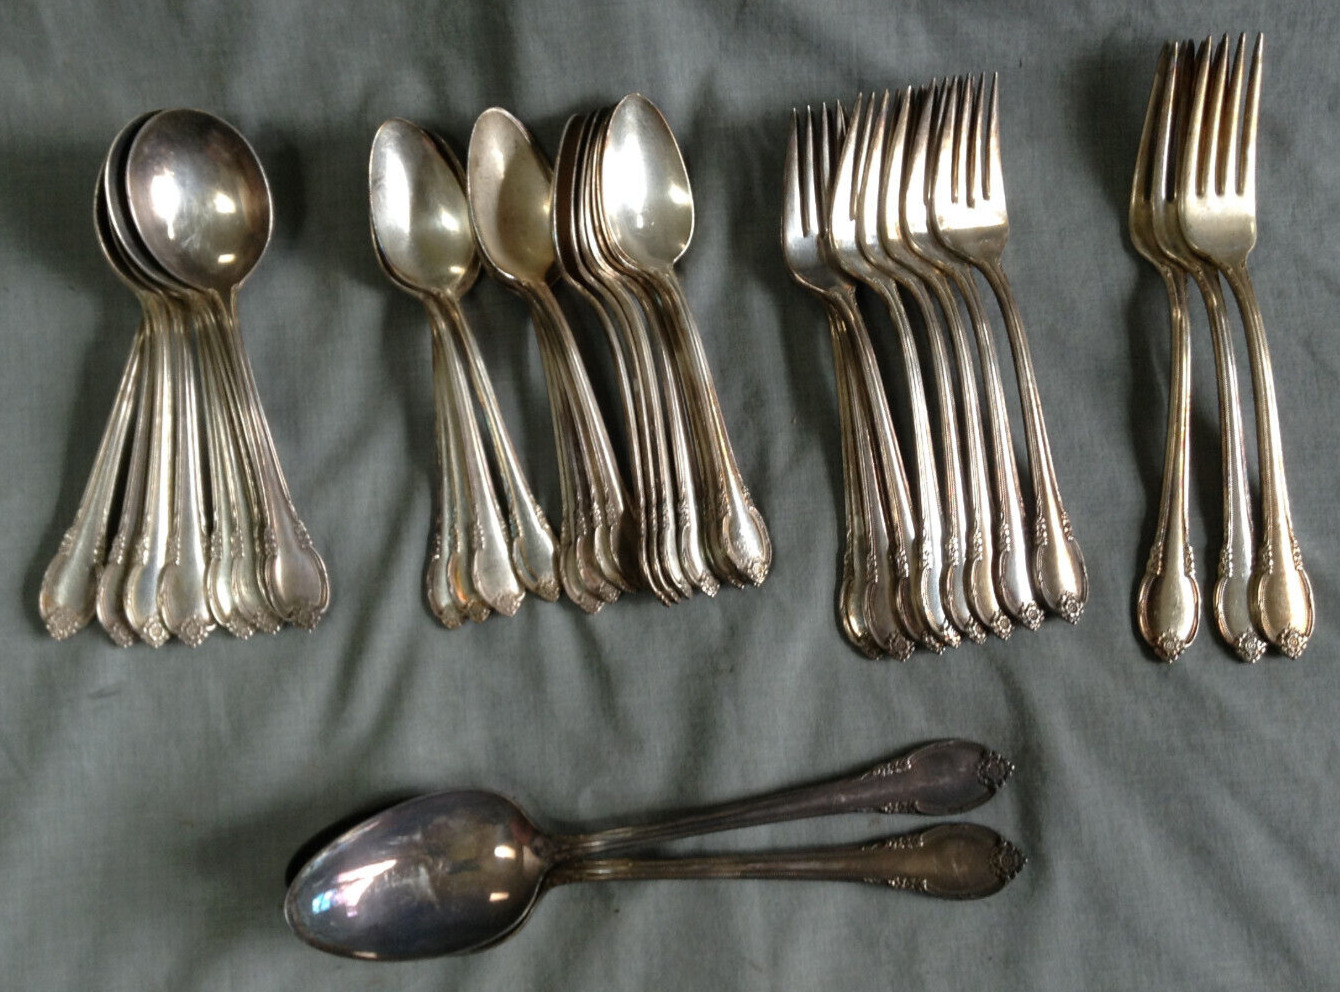 Vintage Silverware 1947 Rogers Bros IS Remembrance - Lot Of 36 Spoons Forks